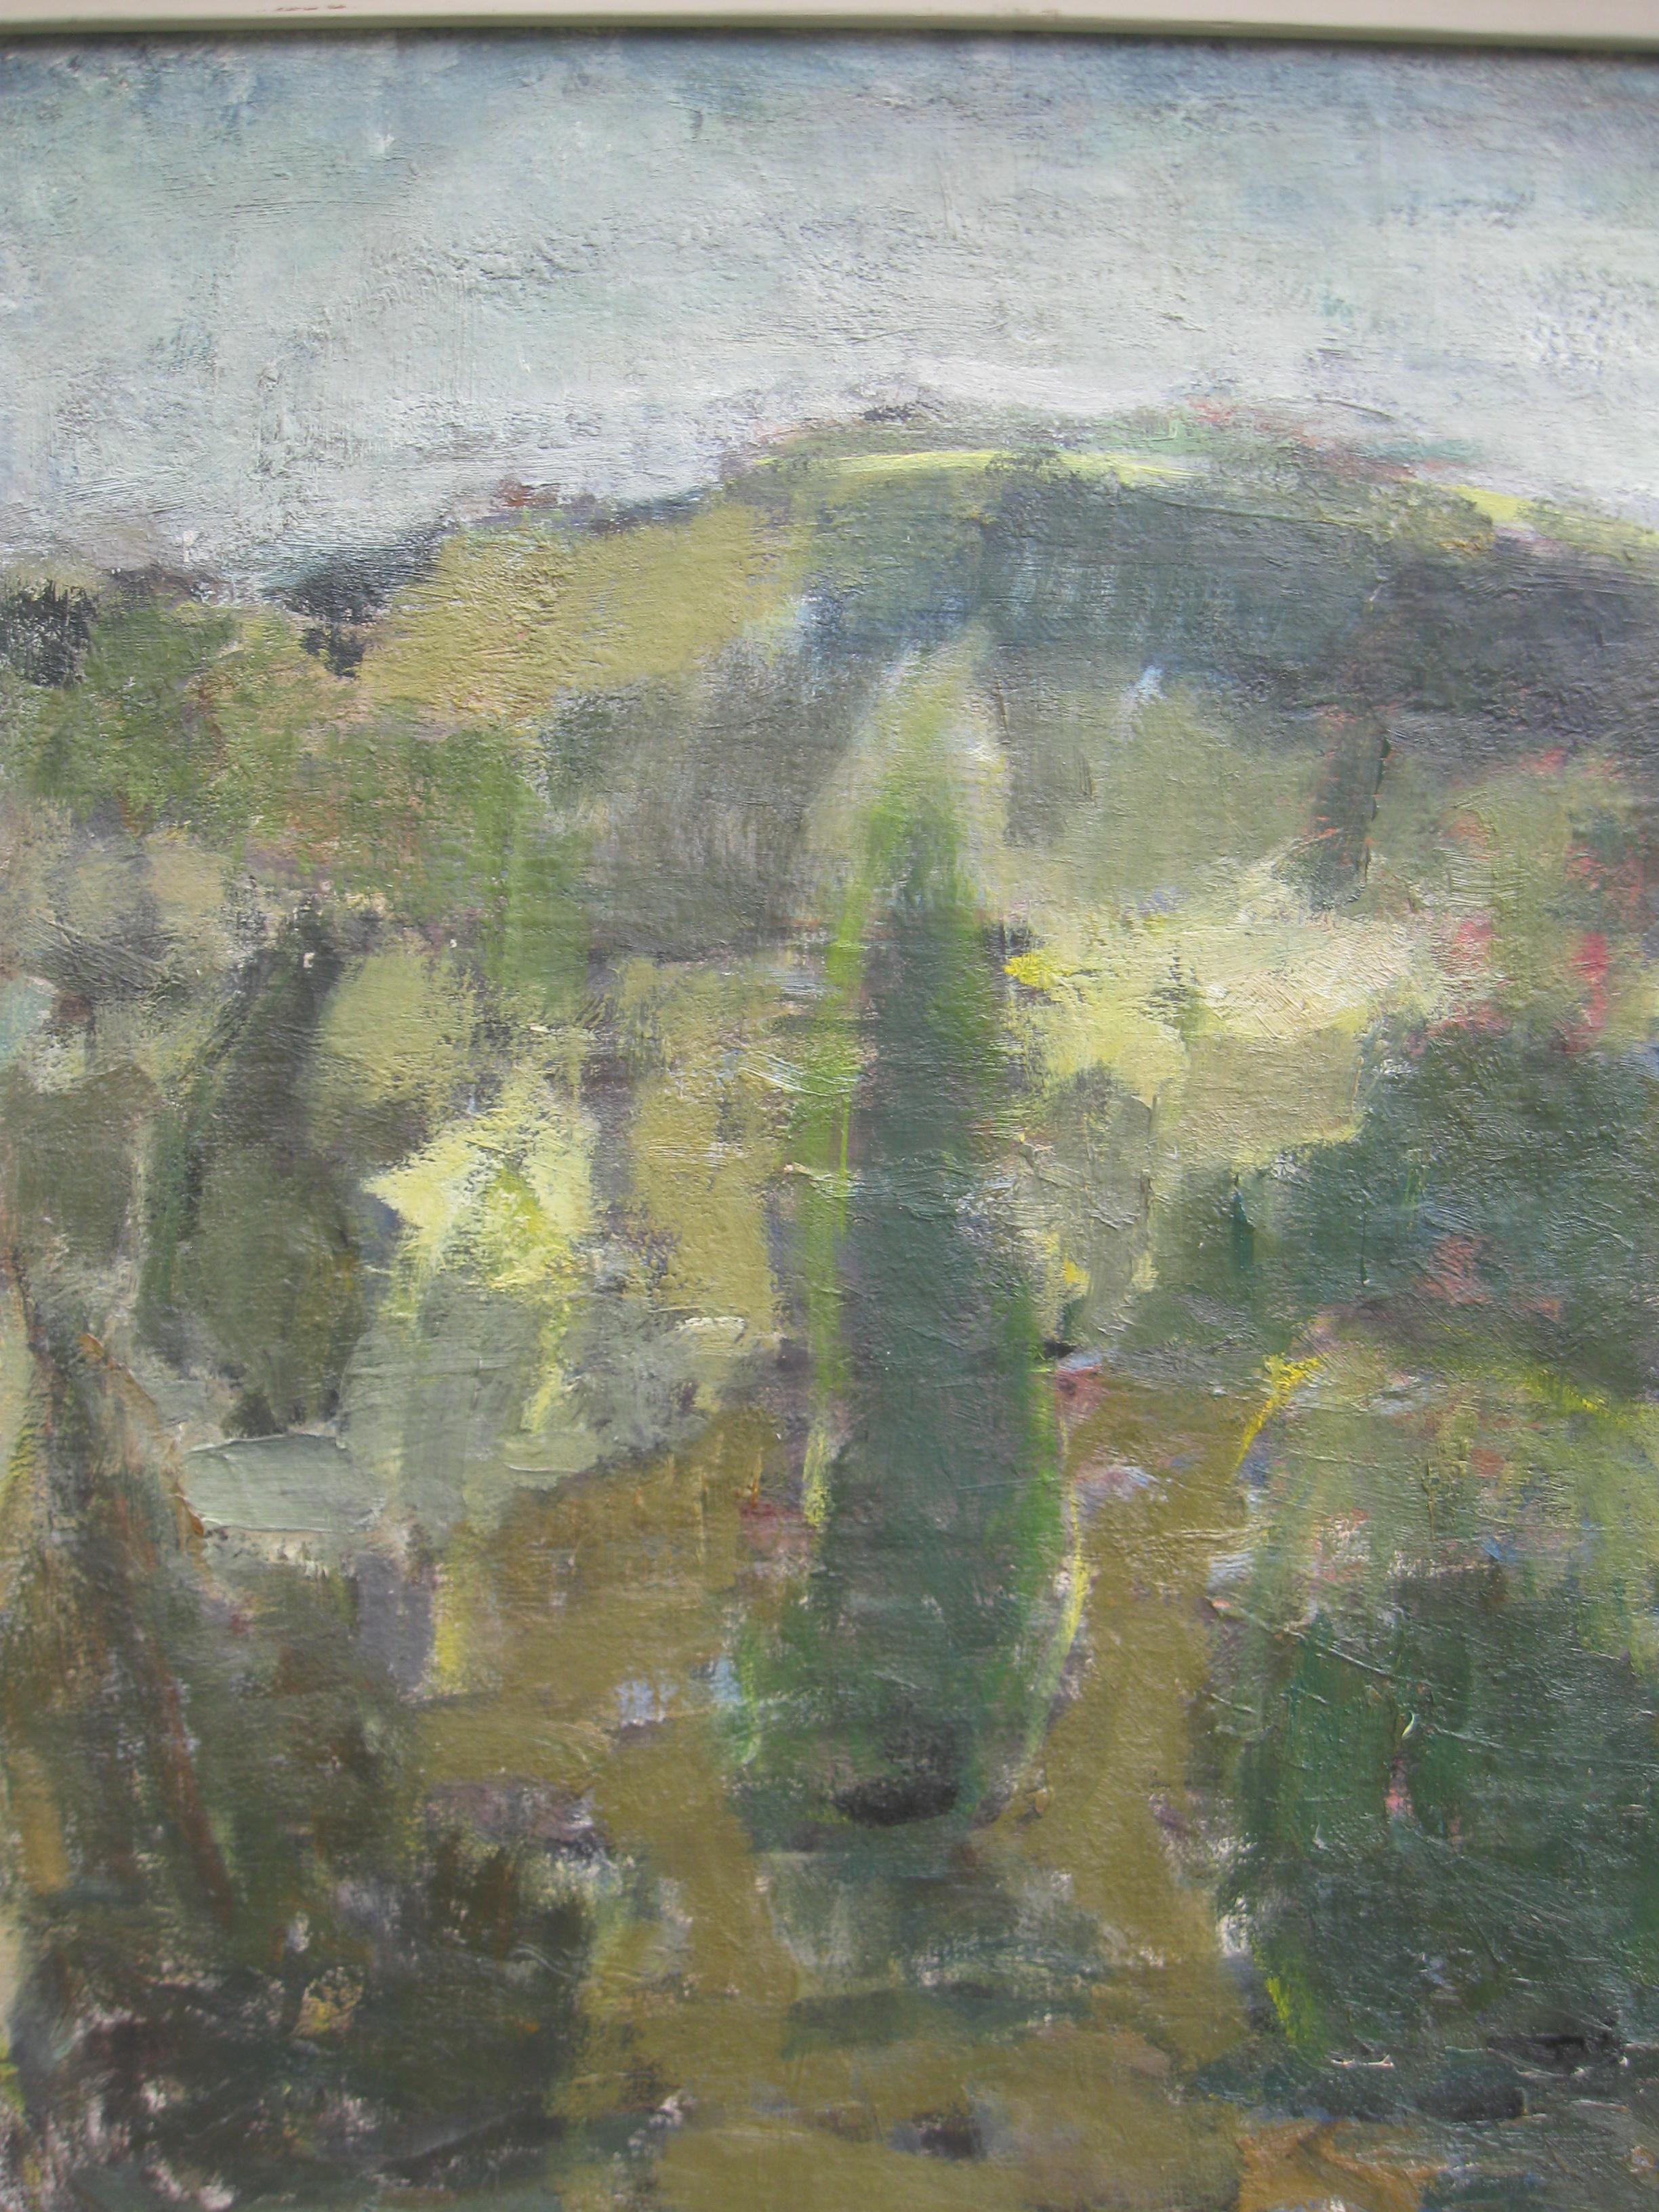 Post Impressionist/ Modernist; 'Hilly Landscape with Ruins' oil circa 1952 - Post-Impressionist Painting by Unknown